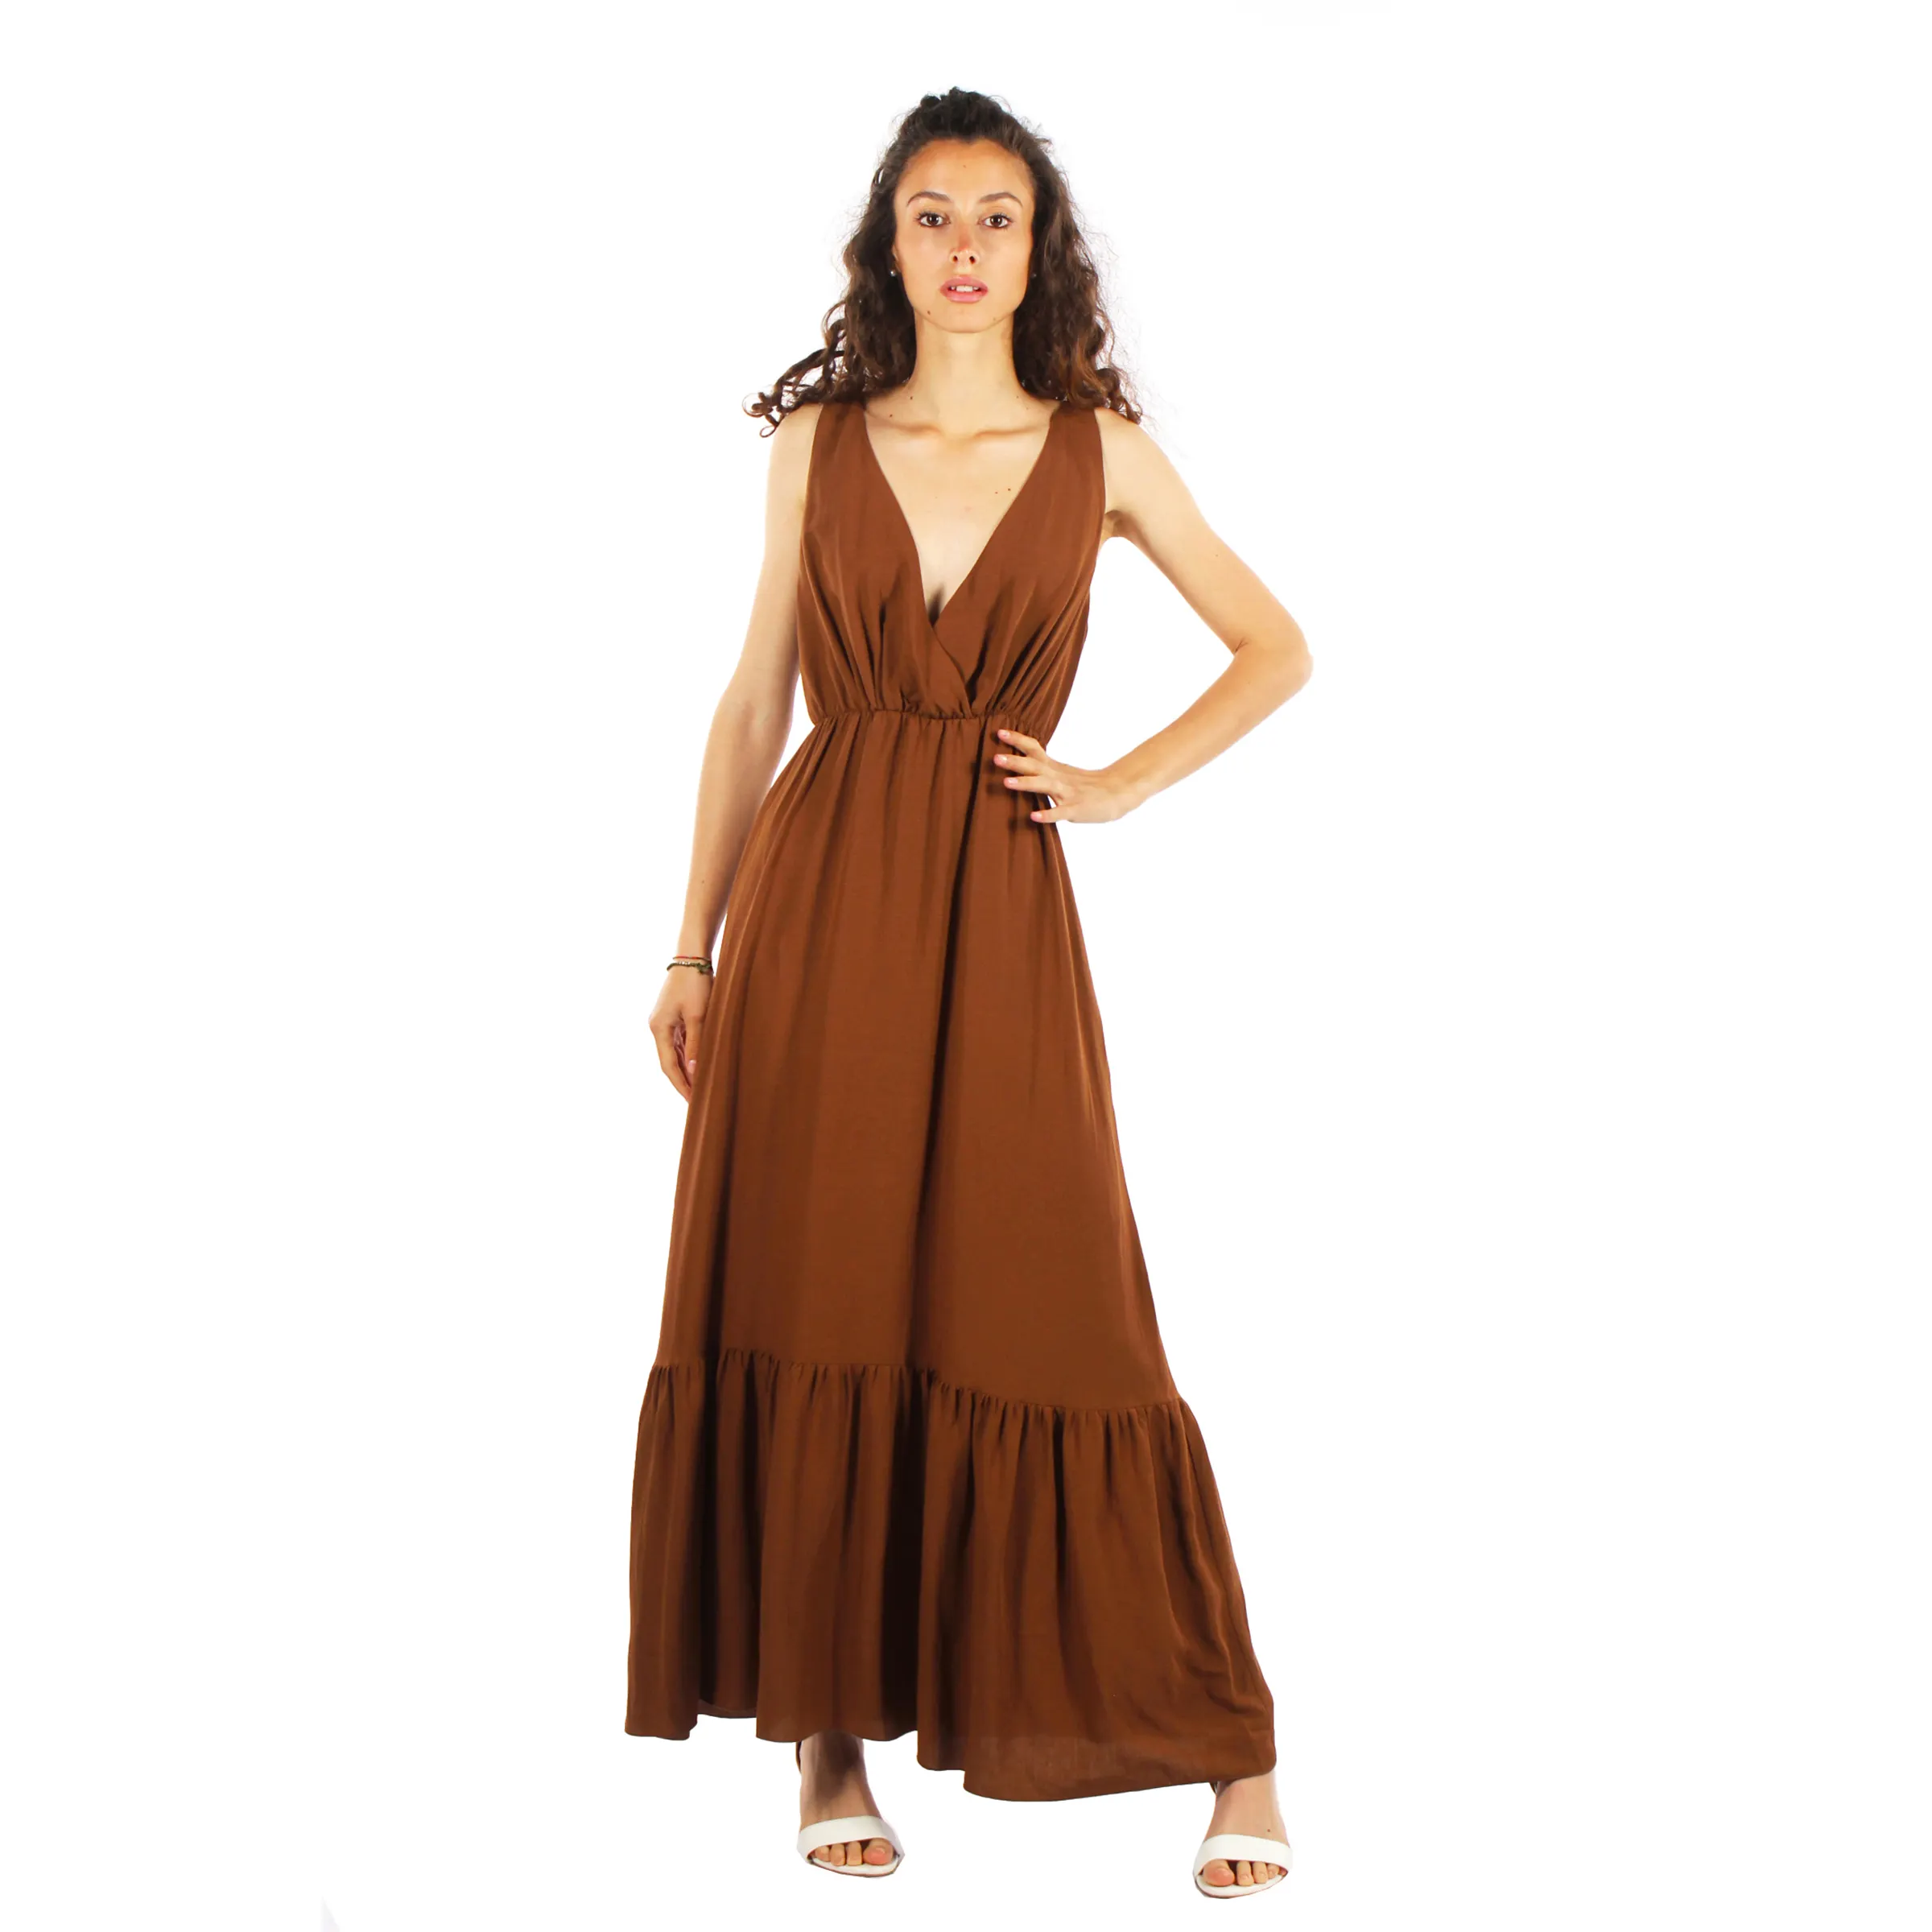 Elegant Long Dress V-Neck Sleeveless with Flowy Ruffles Earth Tone Viscose Linen for a Sophisticated Look size small